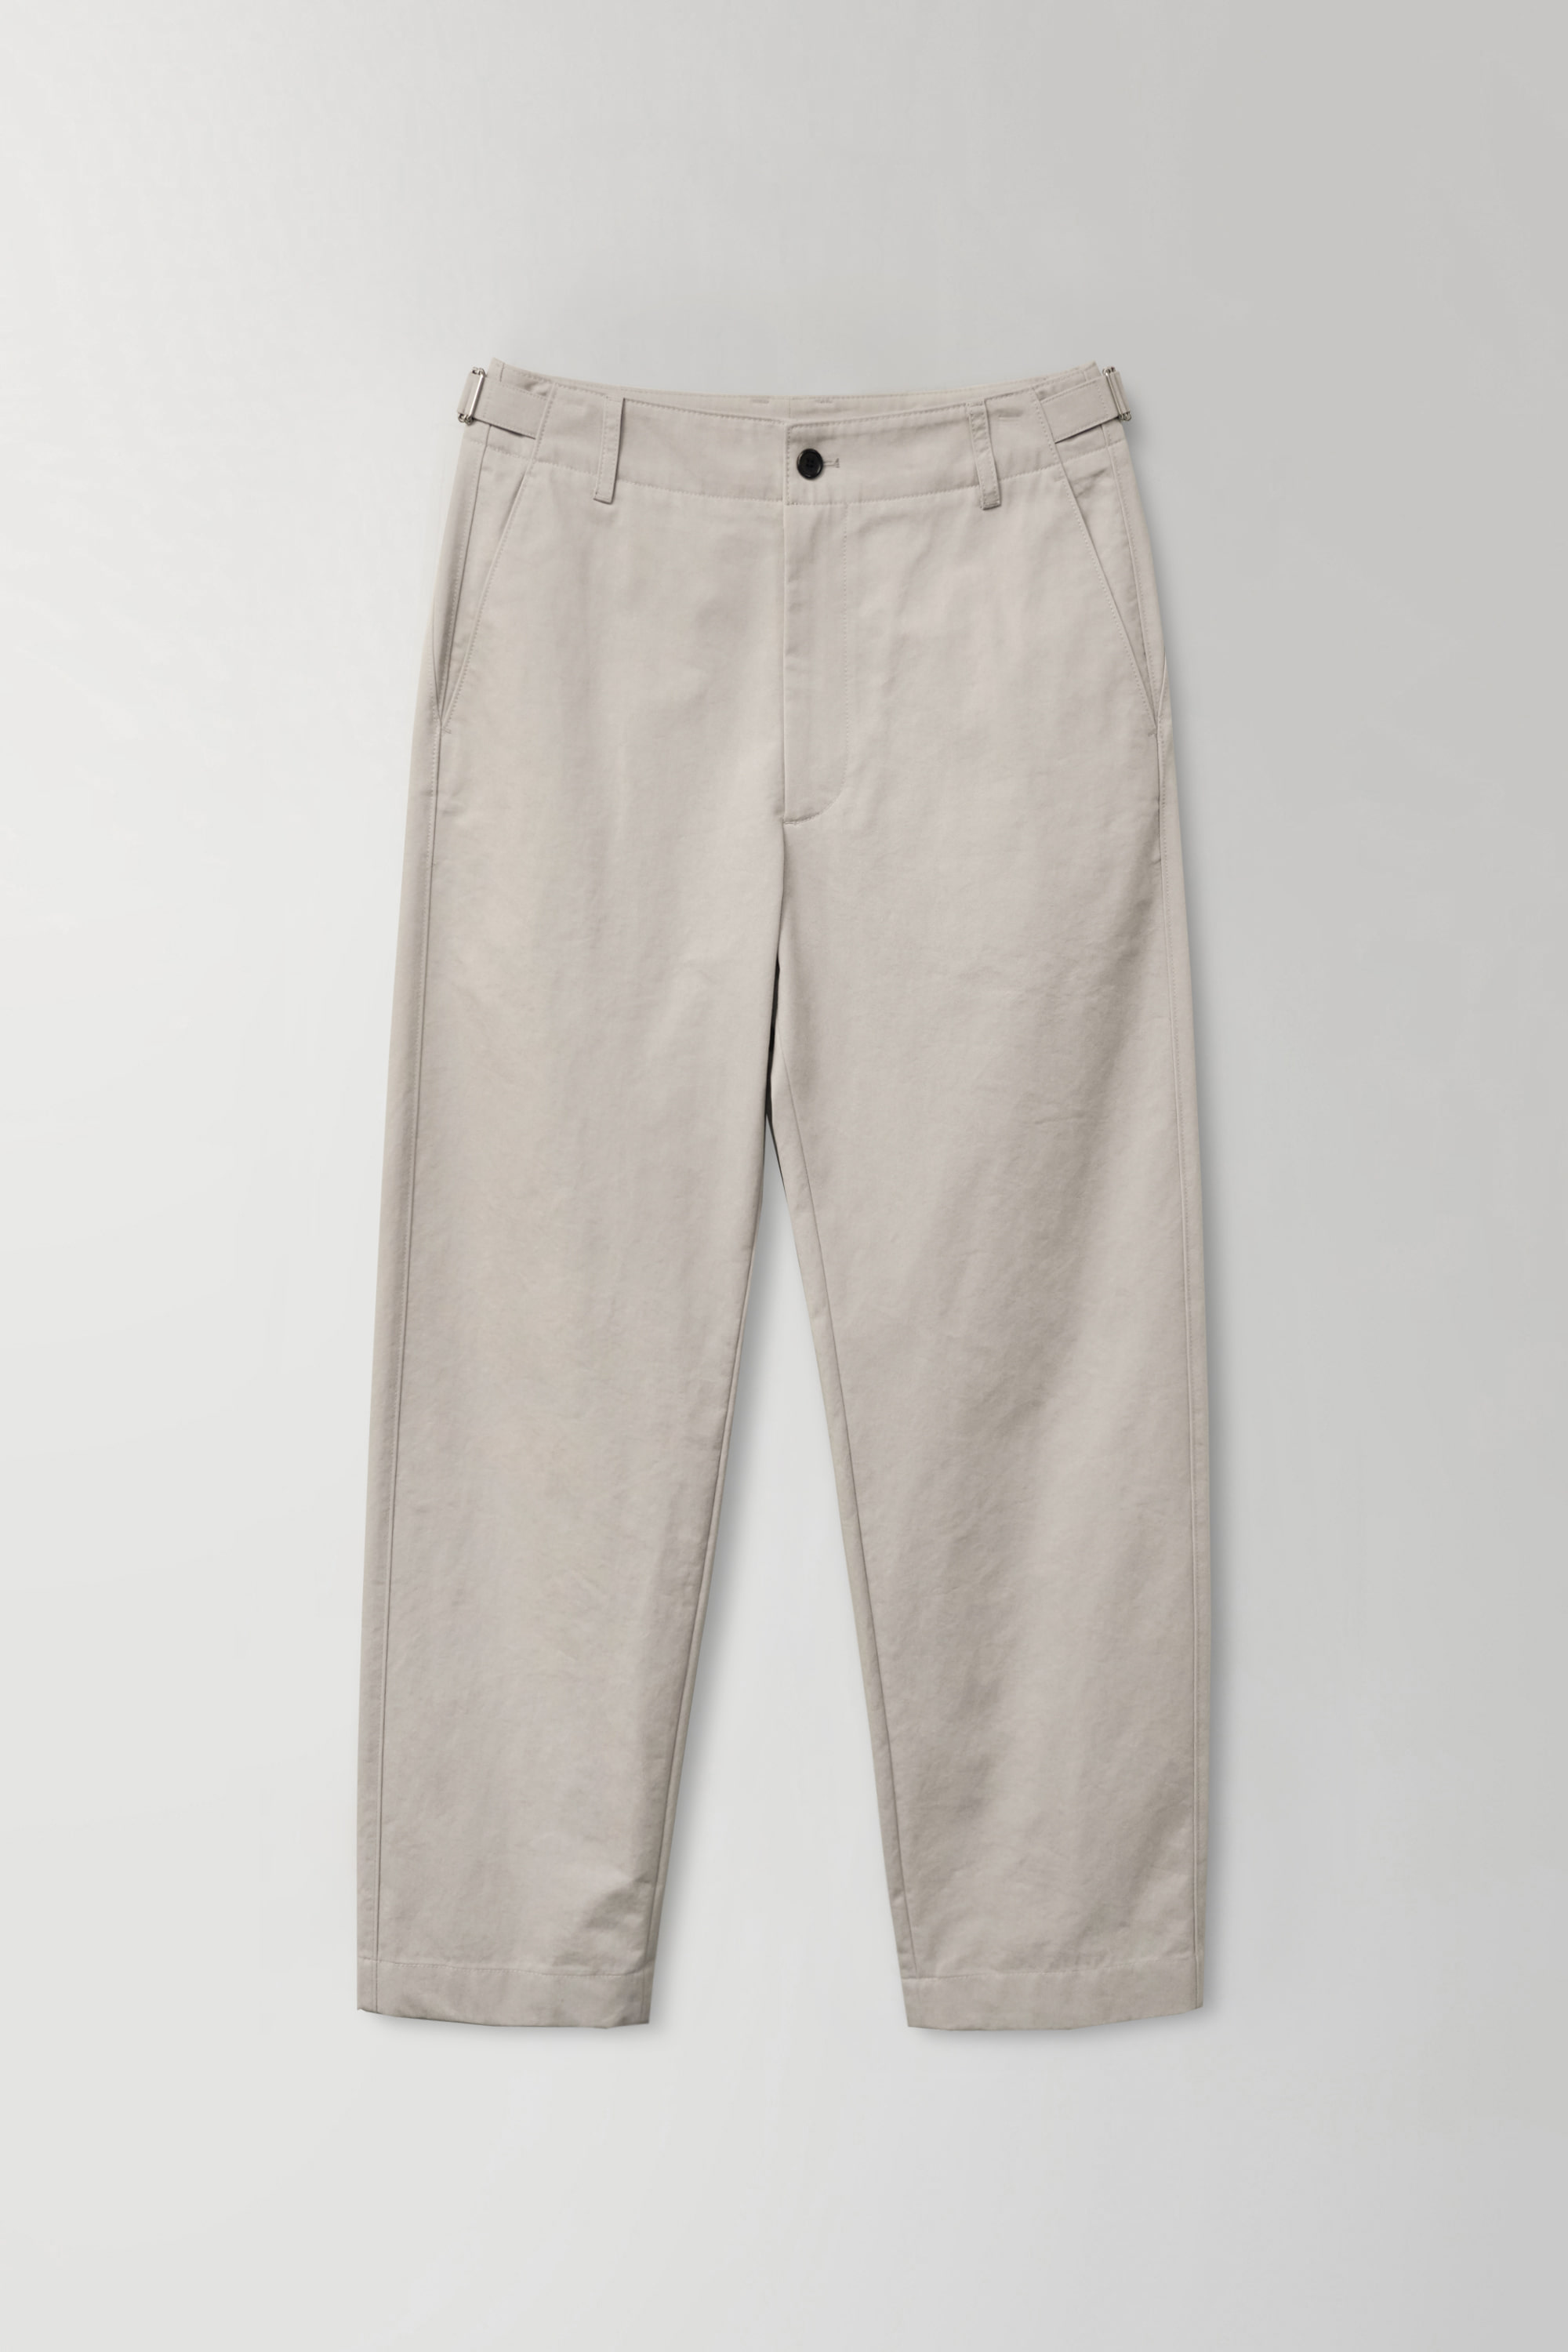 OFFICER CHINO PANTS (TYPE2) - SAND BEIGE